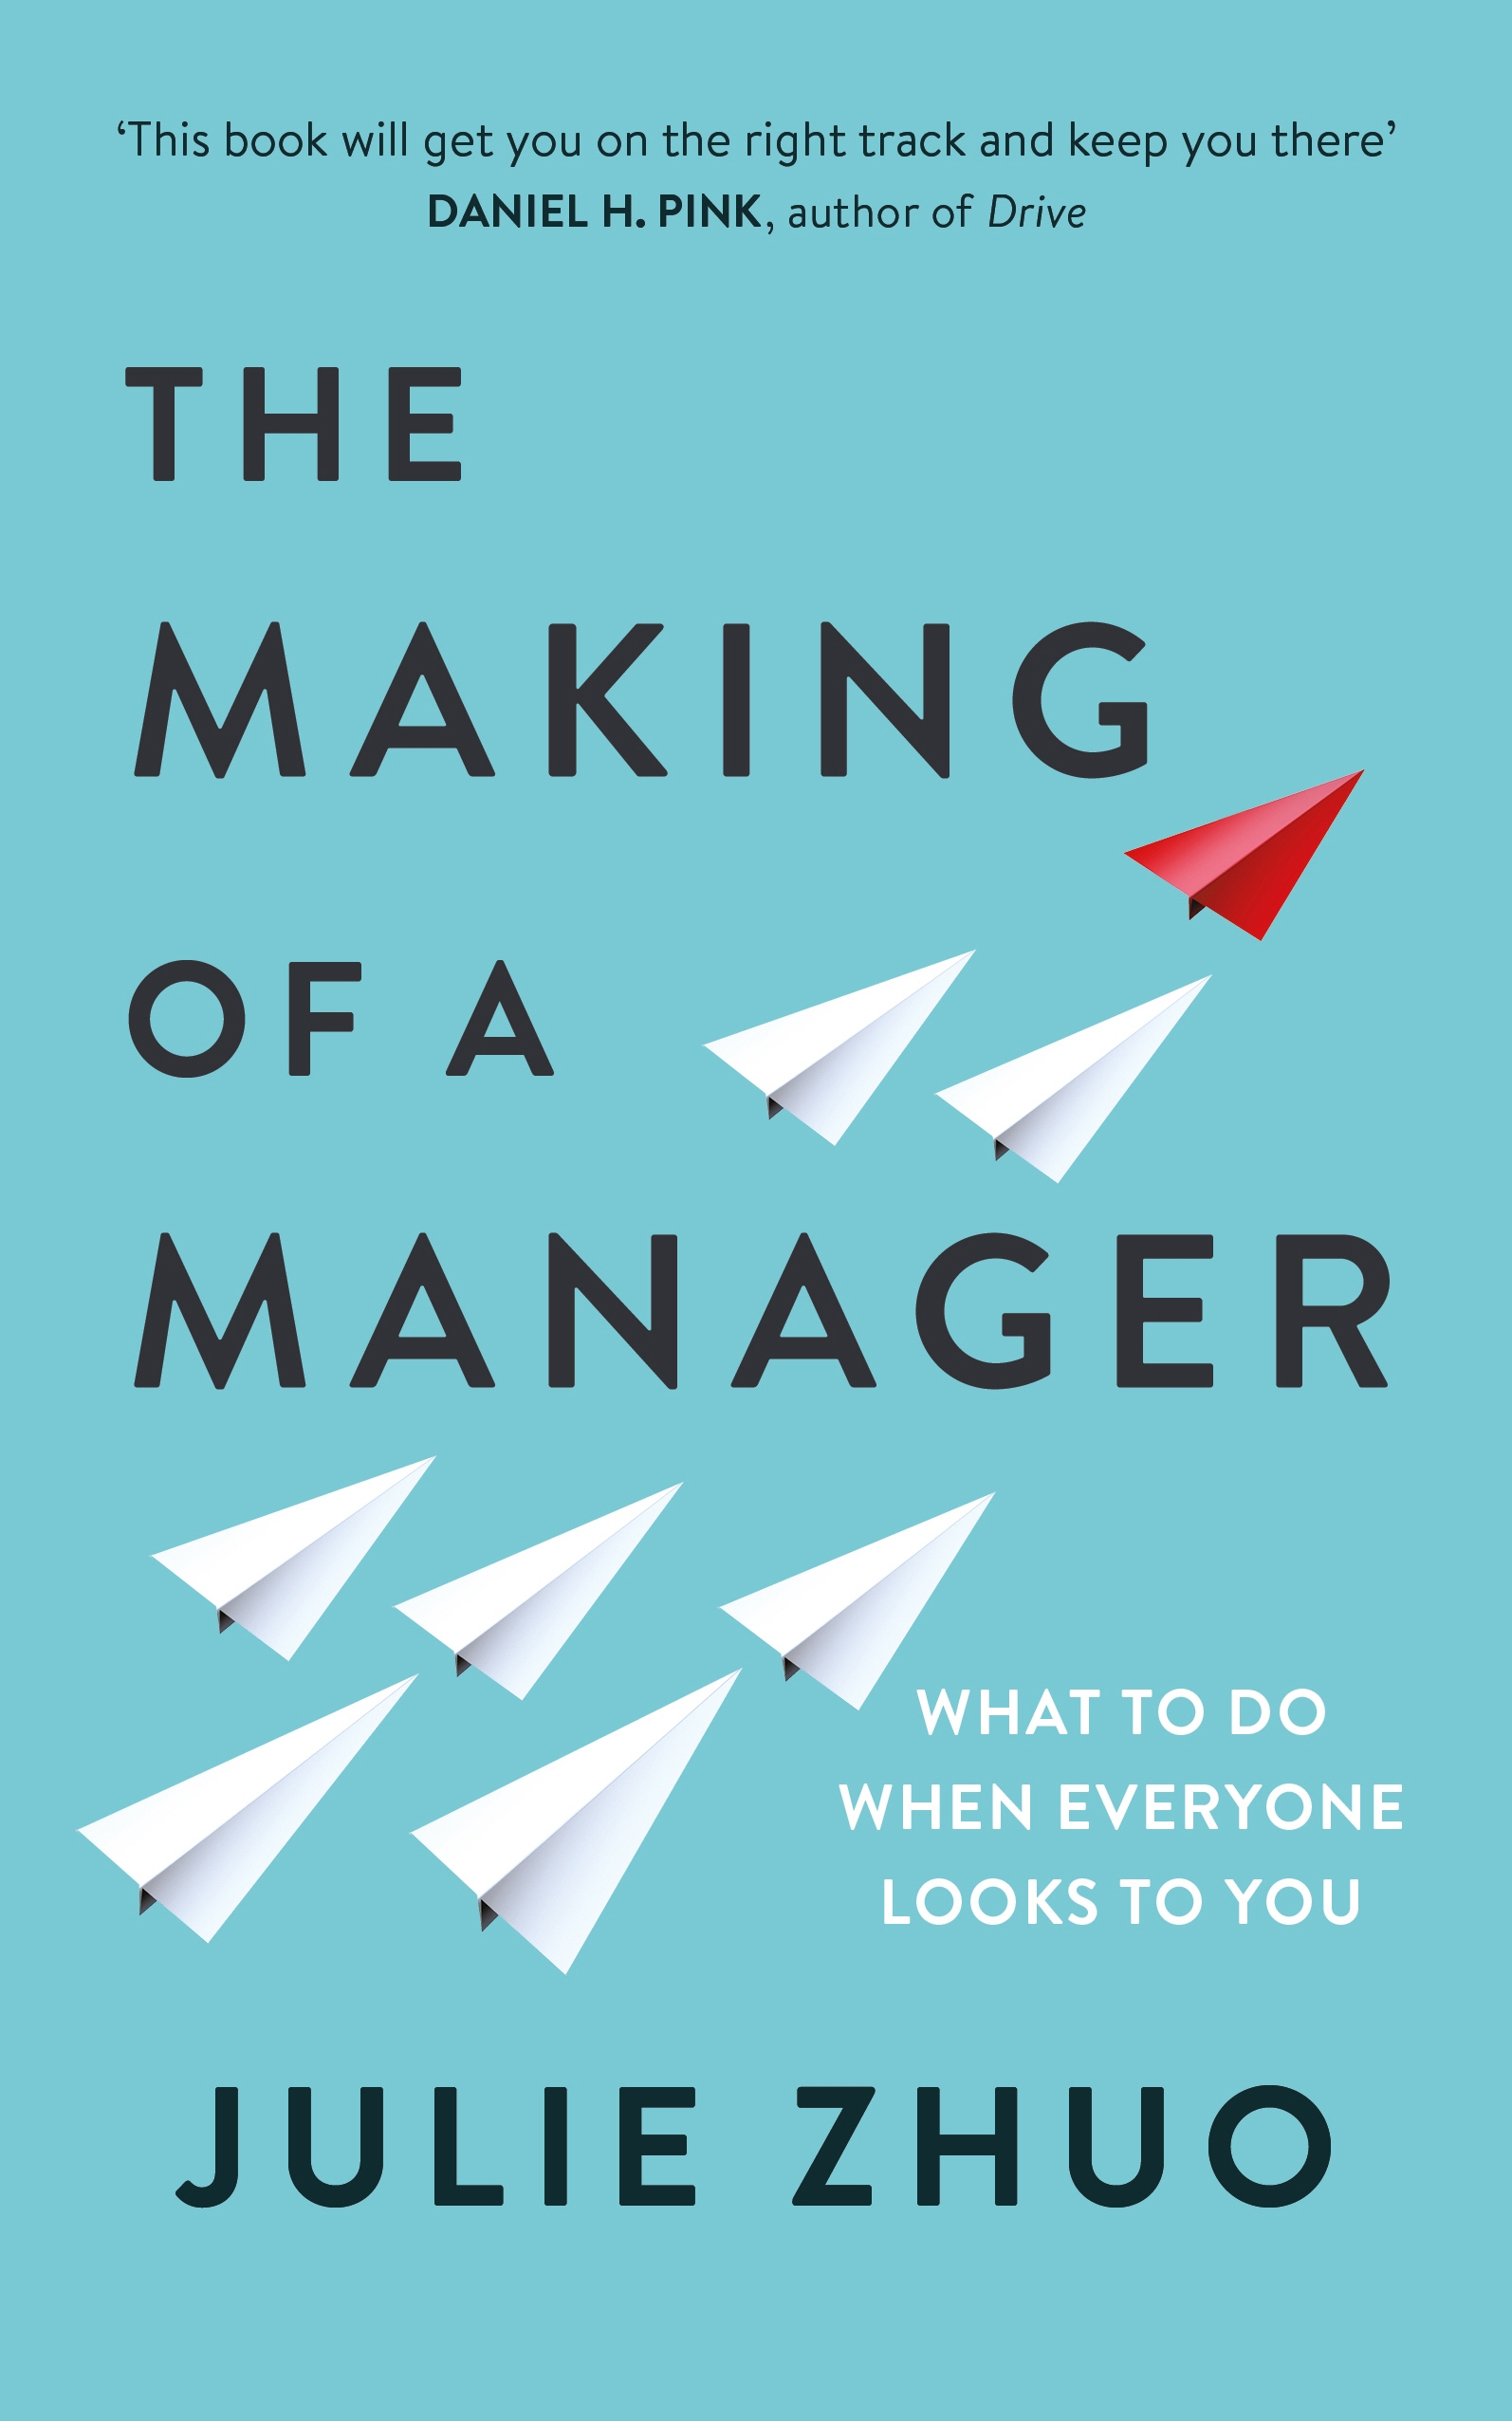 the-making-of-a-manager-by-julie-zhuo-penguin-books-new-zealand